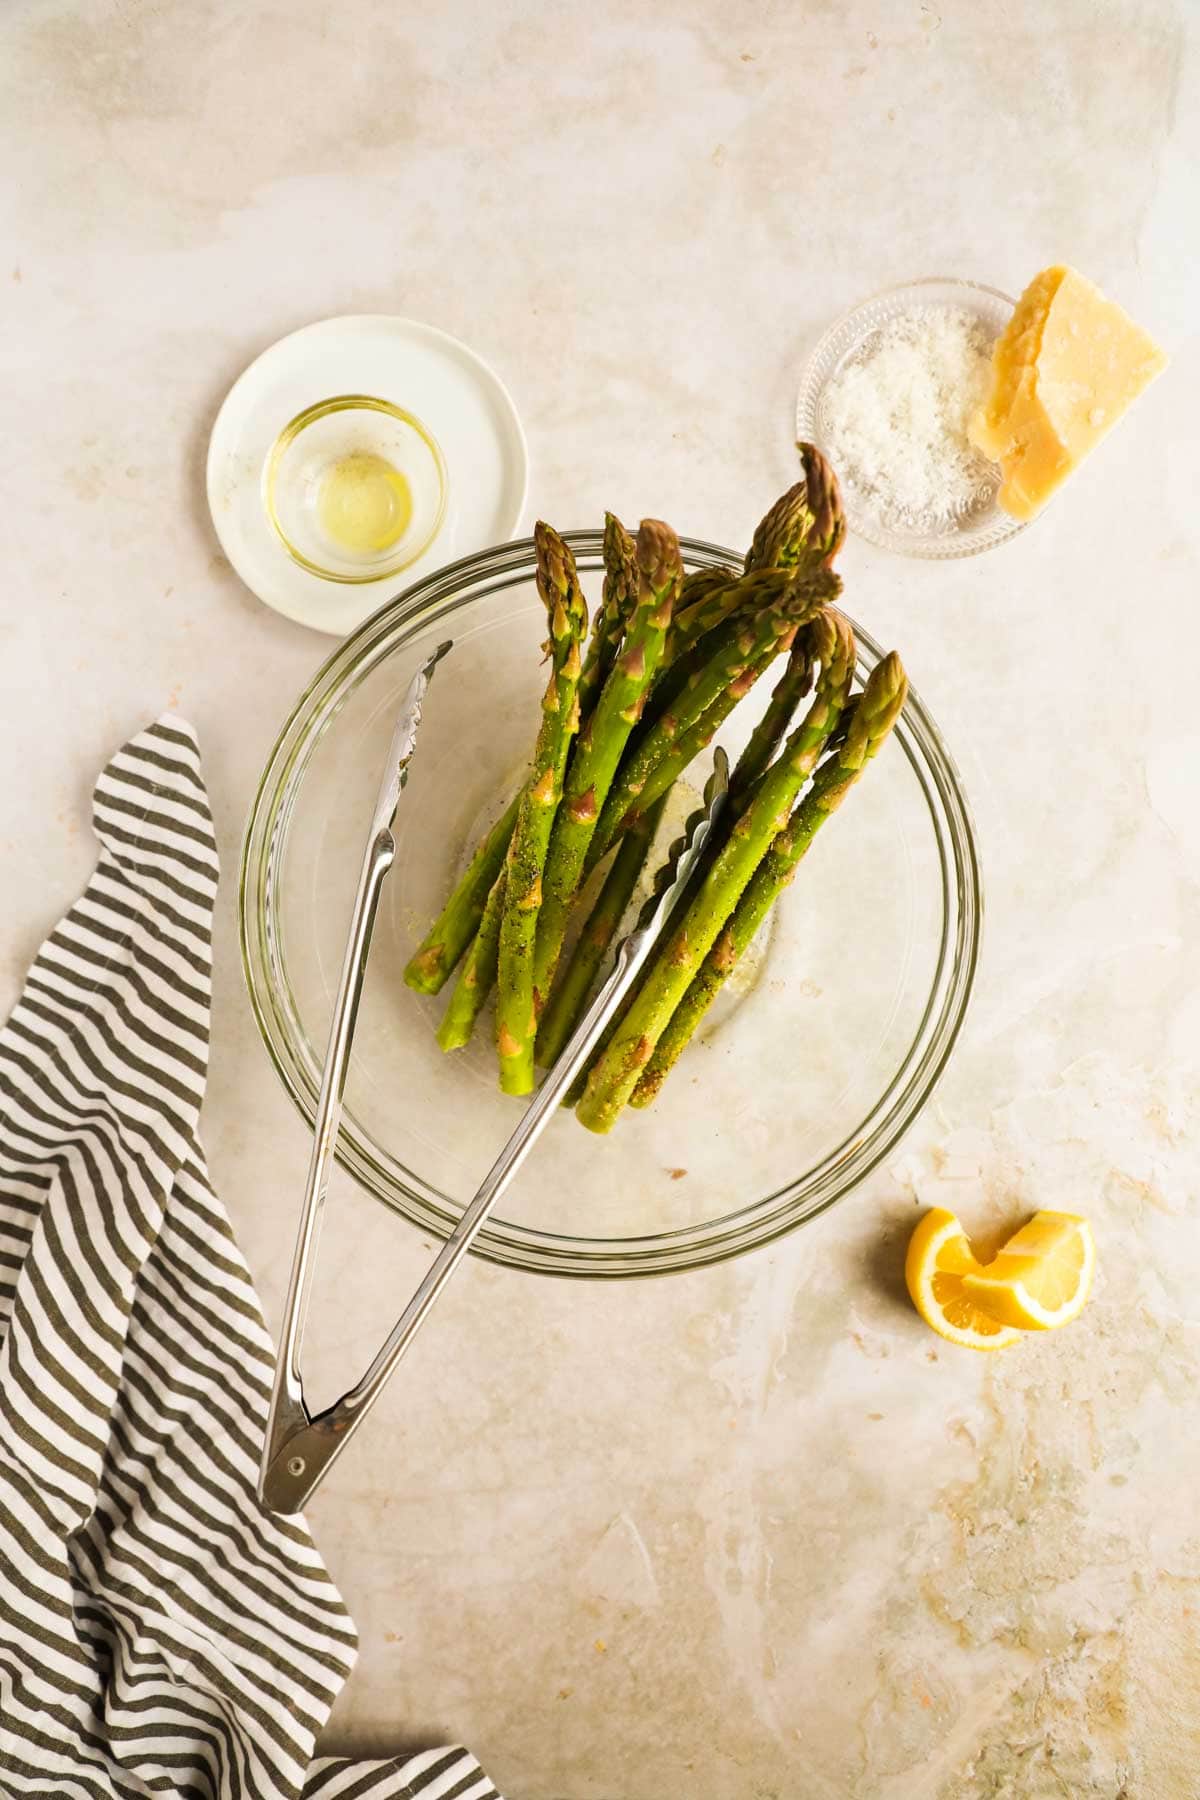 Asparagus with olive oil and seasoning in glass bowl with tongs flatlay.